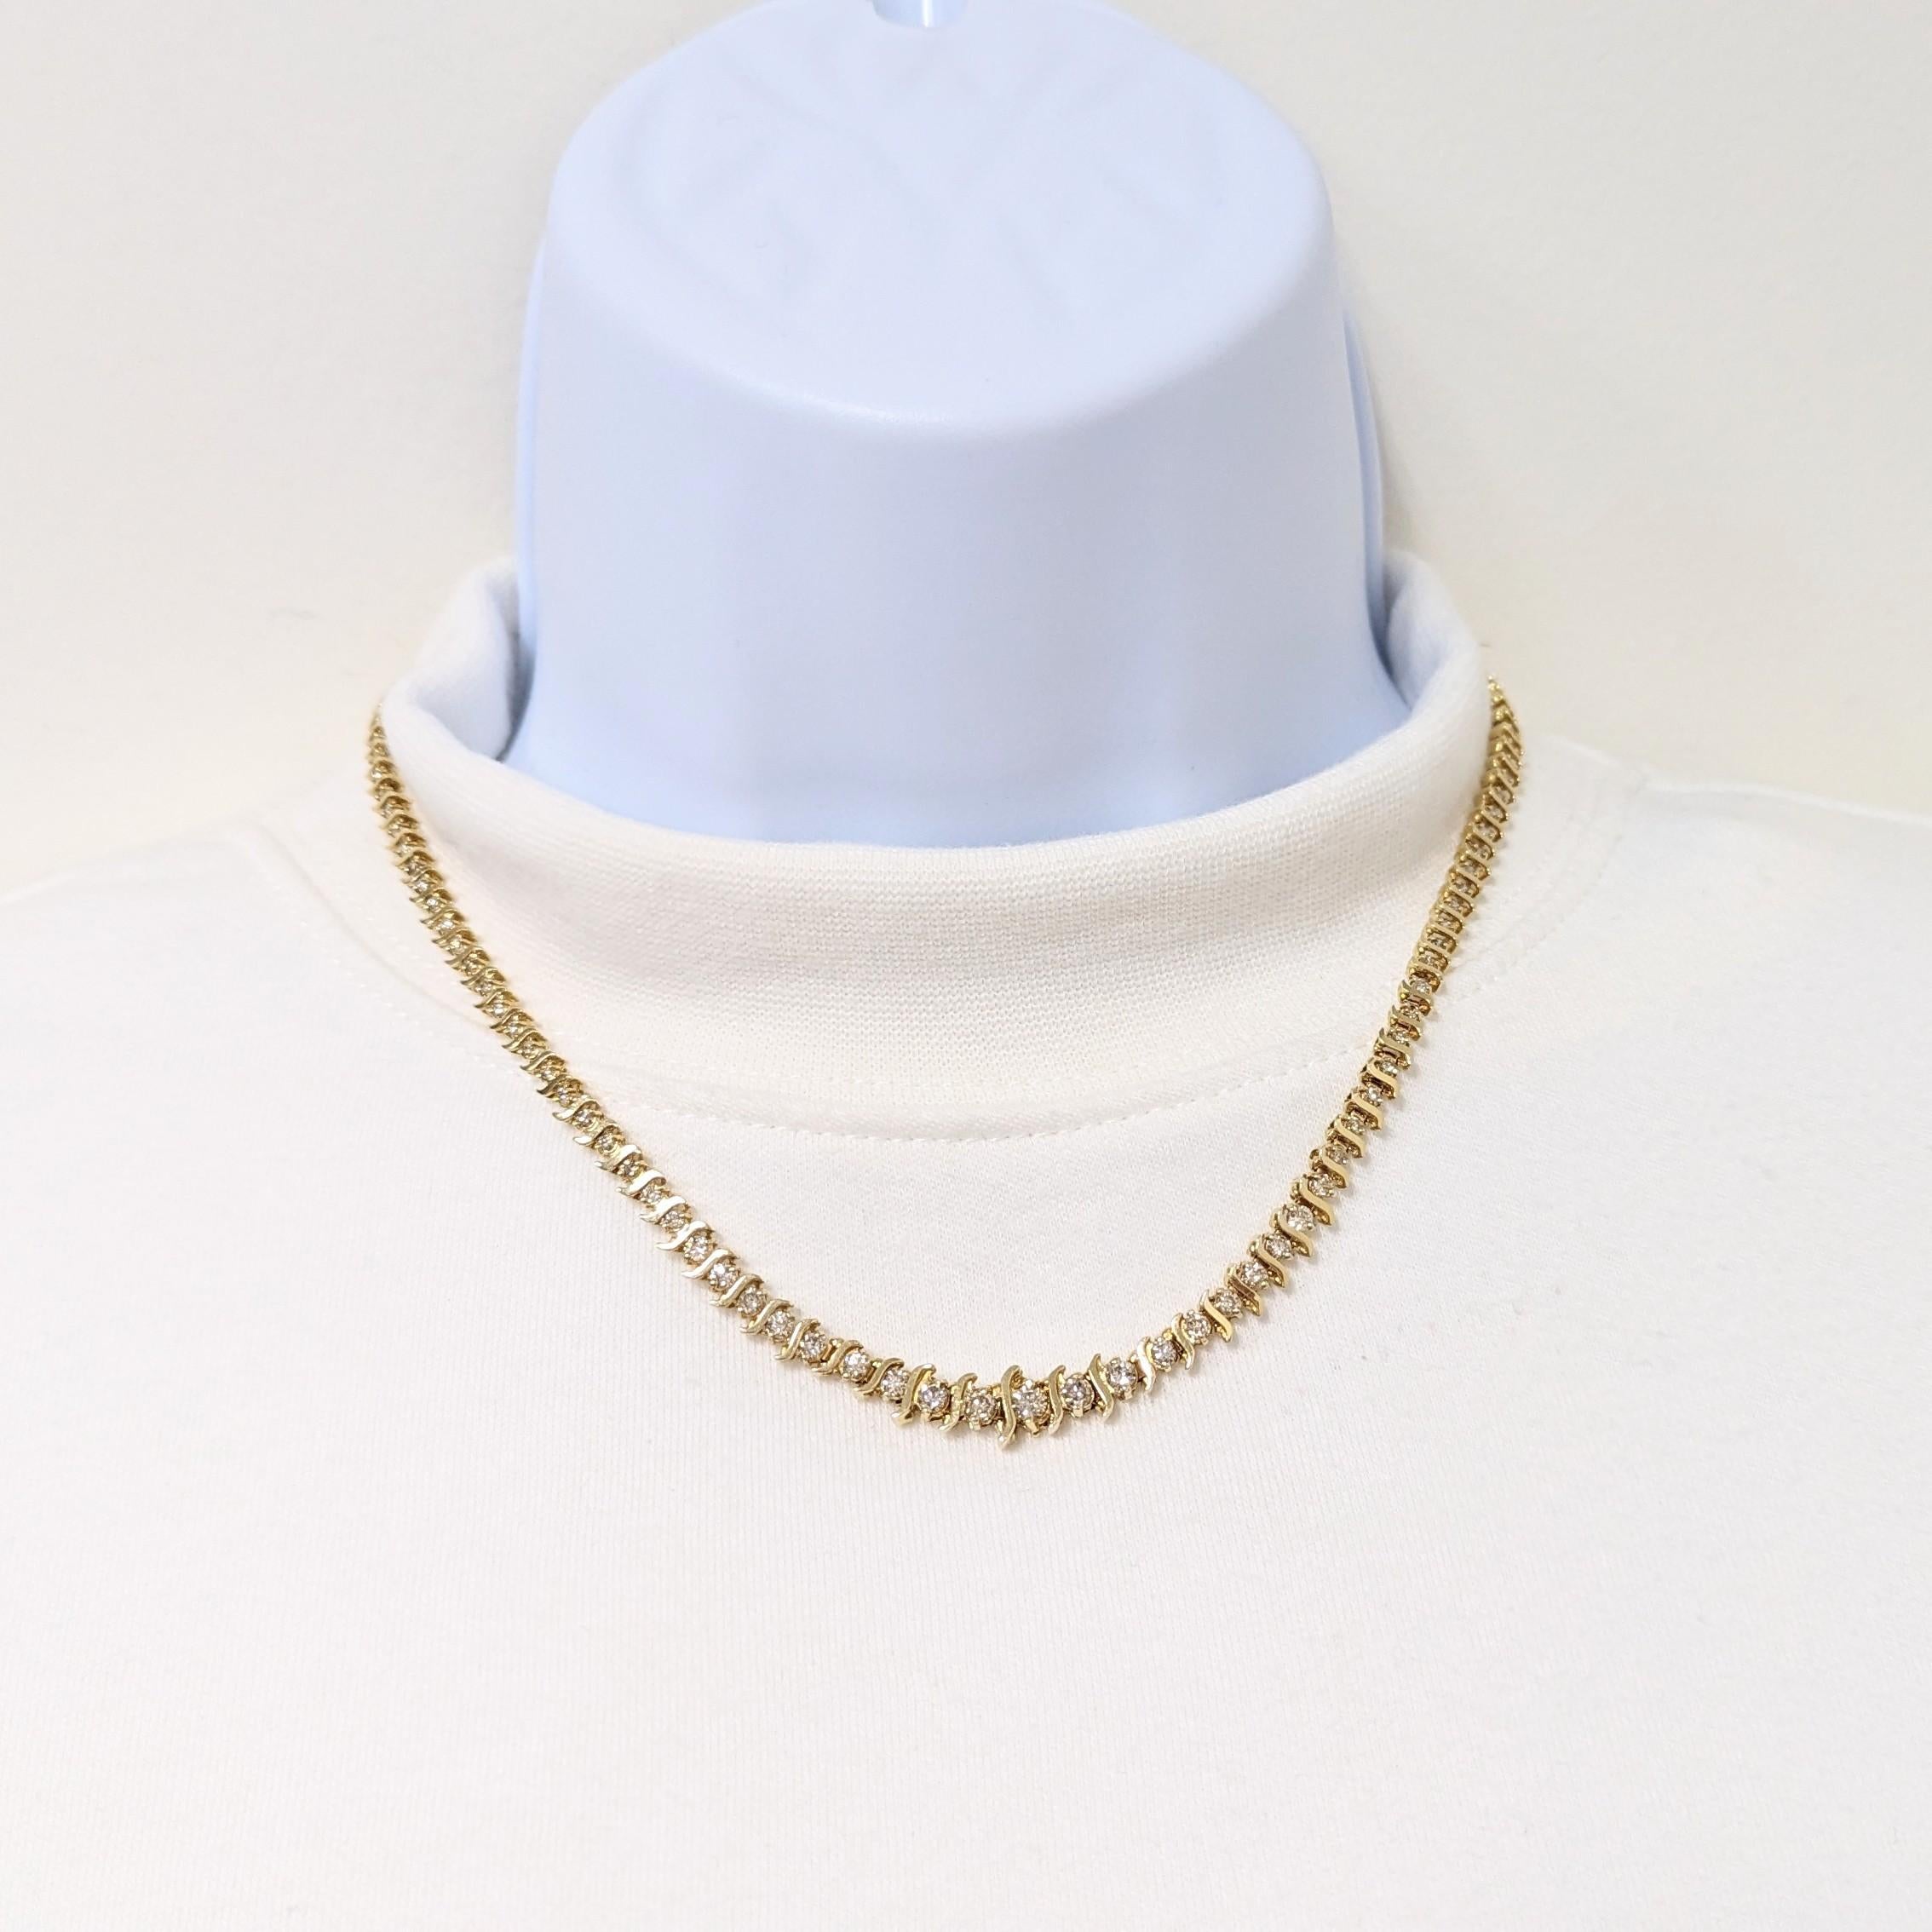 Beautiful 4.00 ct. white diamond round necklace.  Handmade in 14k yellow gold.  Length is 16.5